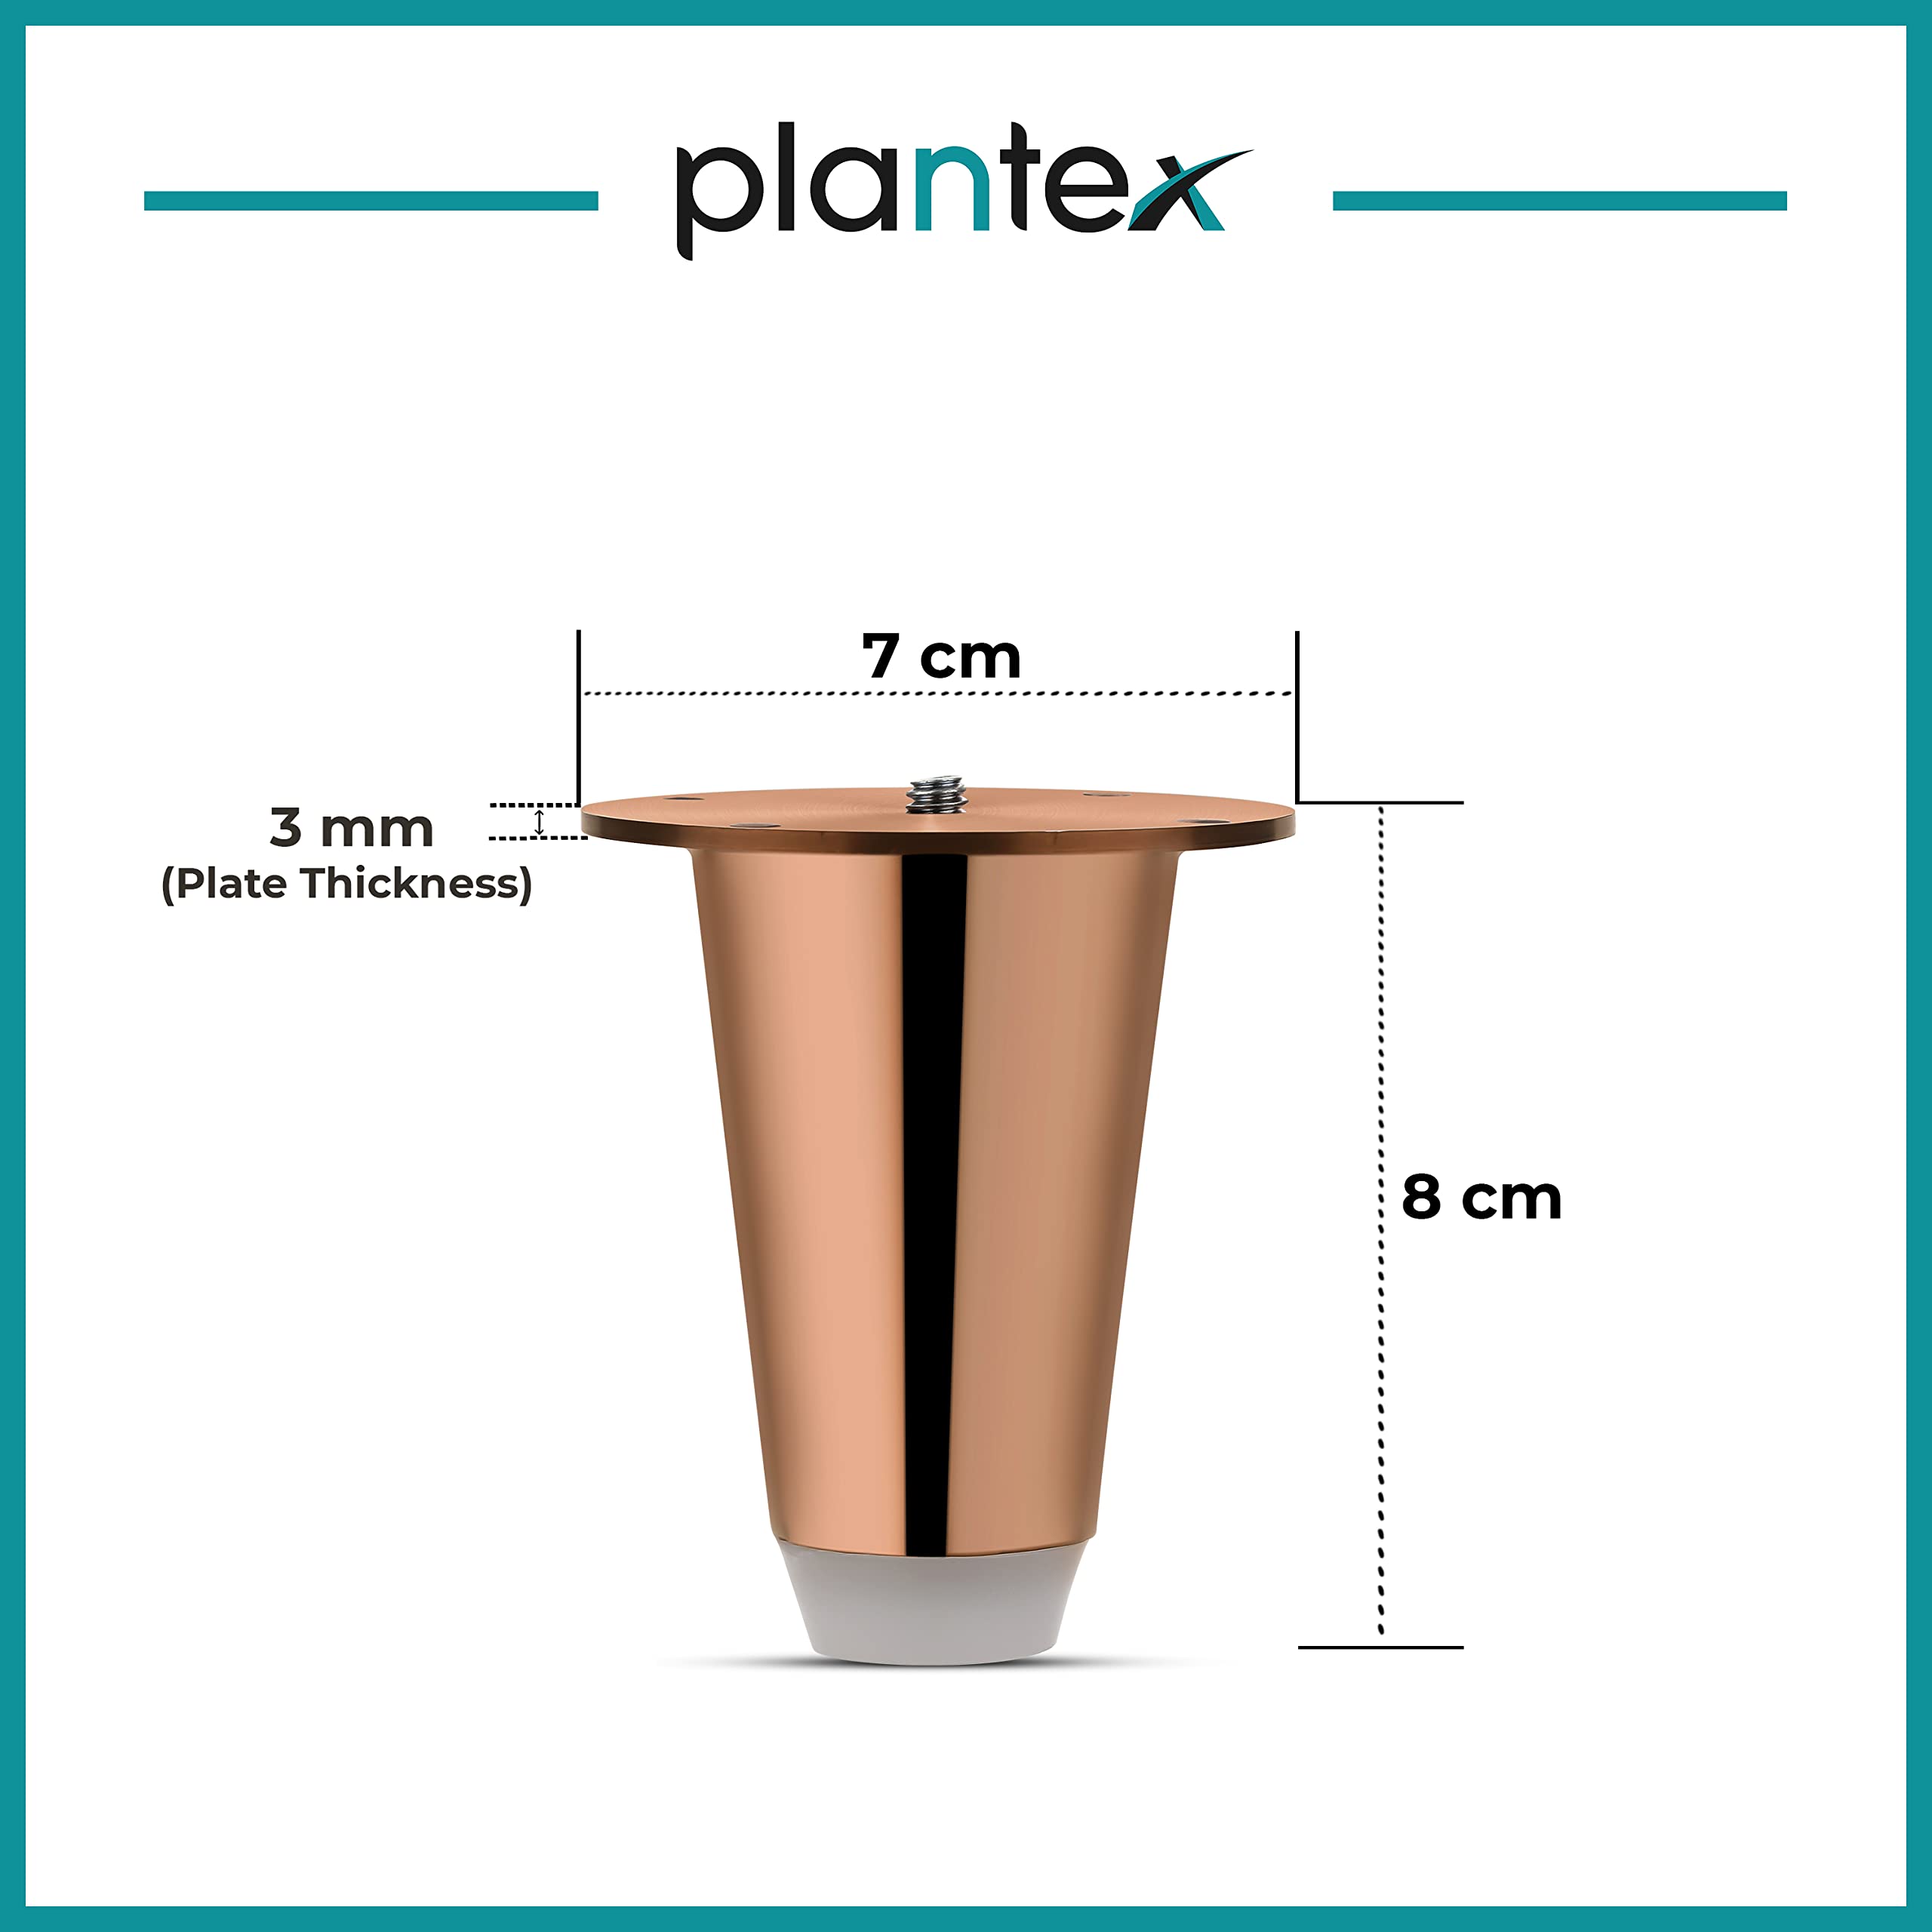 Plantex Heavy Duty Stainless Steel 3 inch Sofa Leg/Bed Furniture Leg Pair for Home Furnitures (DTS-53, Rose Gold) – 10 Pcs